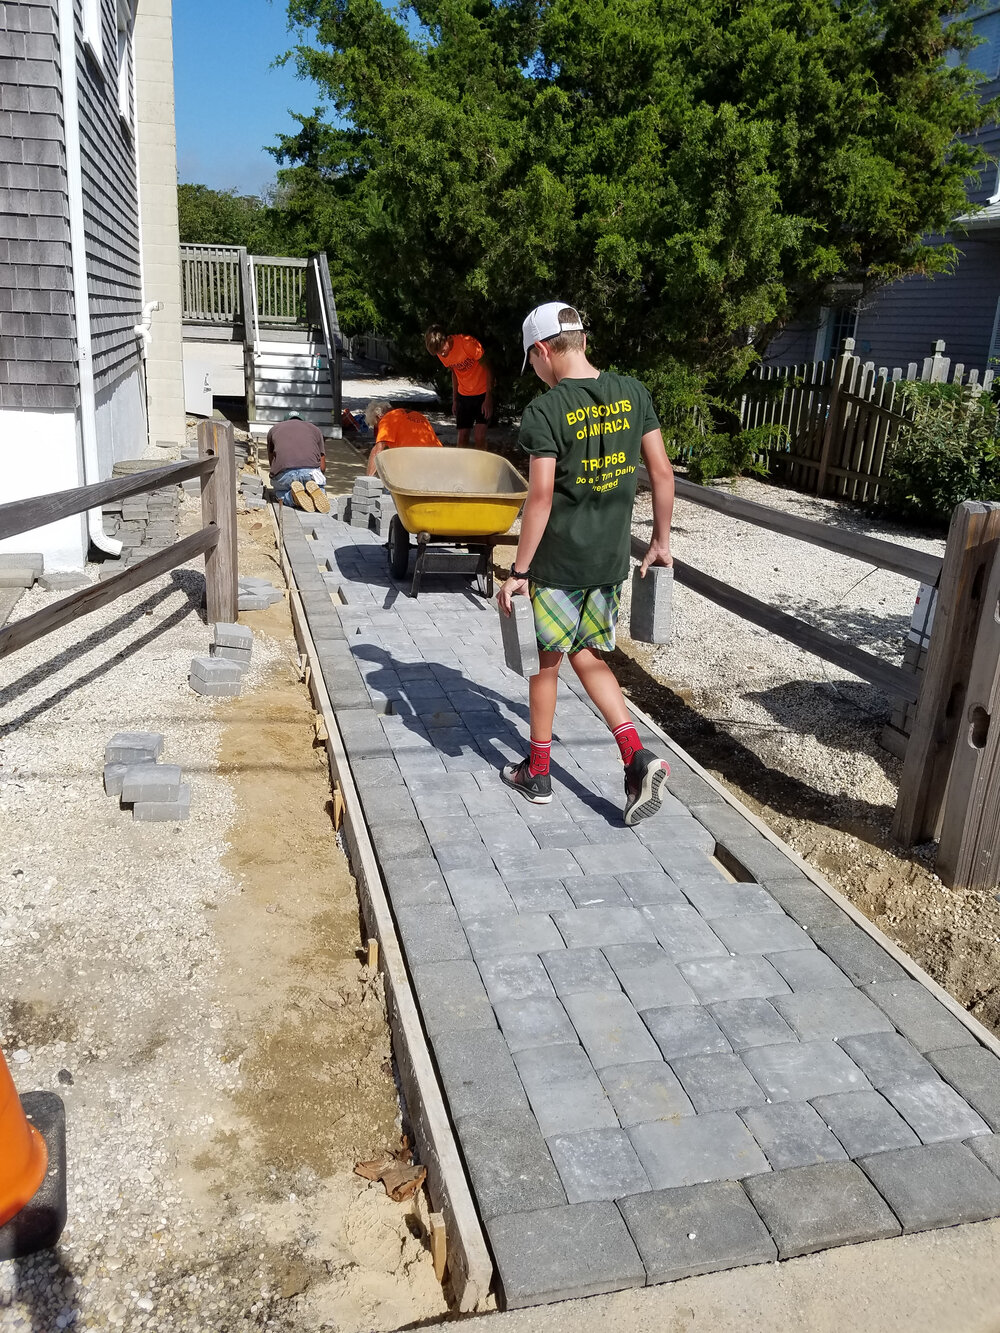 Bradley carts the pavers before completion.